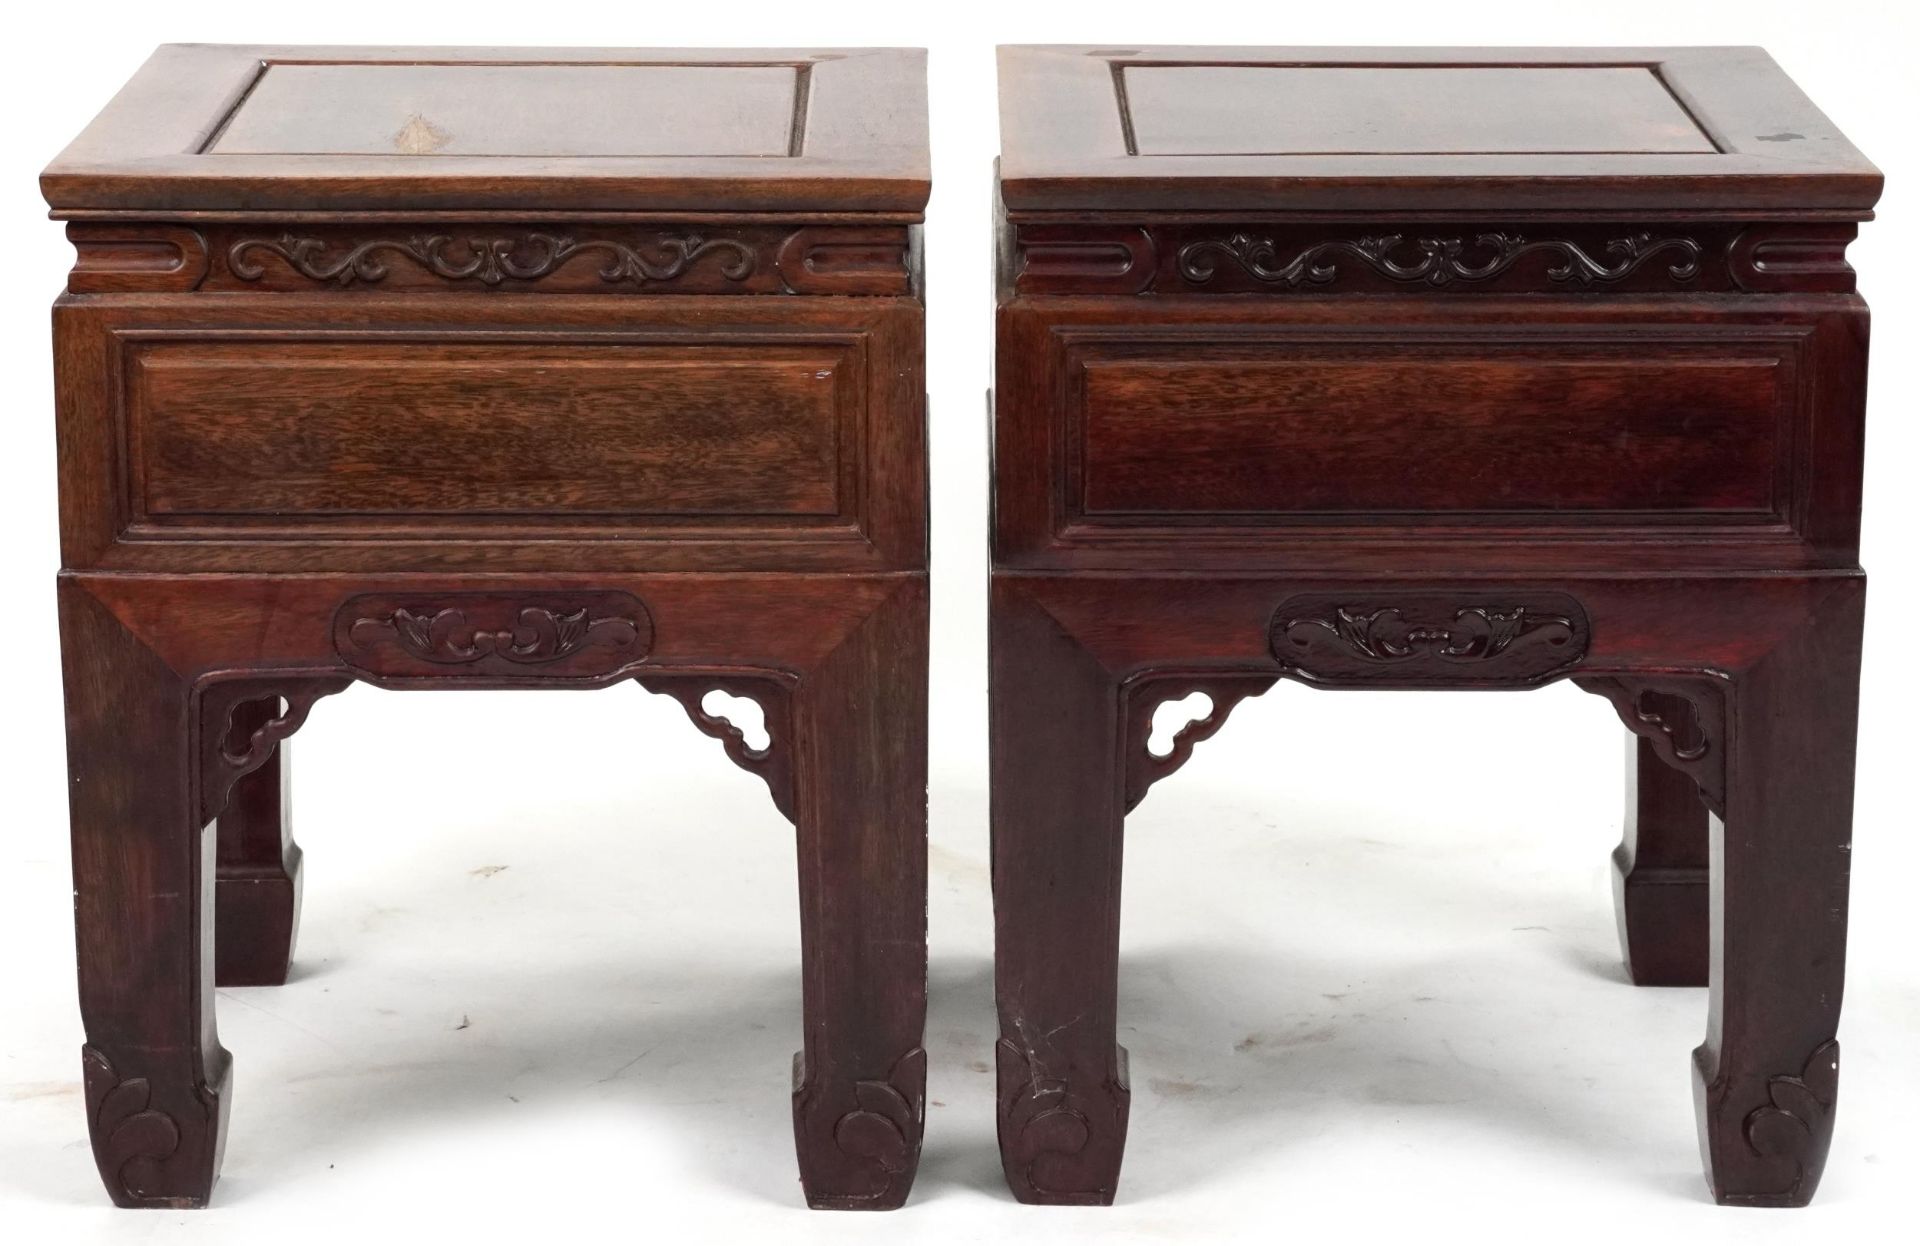 Pair of Chinese carved hardwood tables with square tops, possibly Hongmu, each 59.5cm H x 49cm W x - Bild 4 aus 4